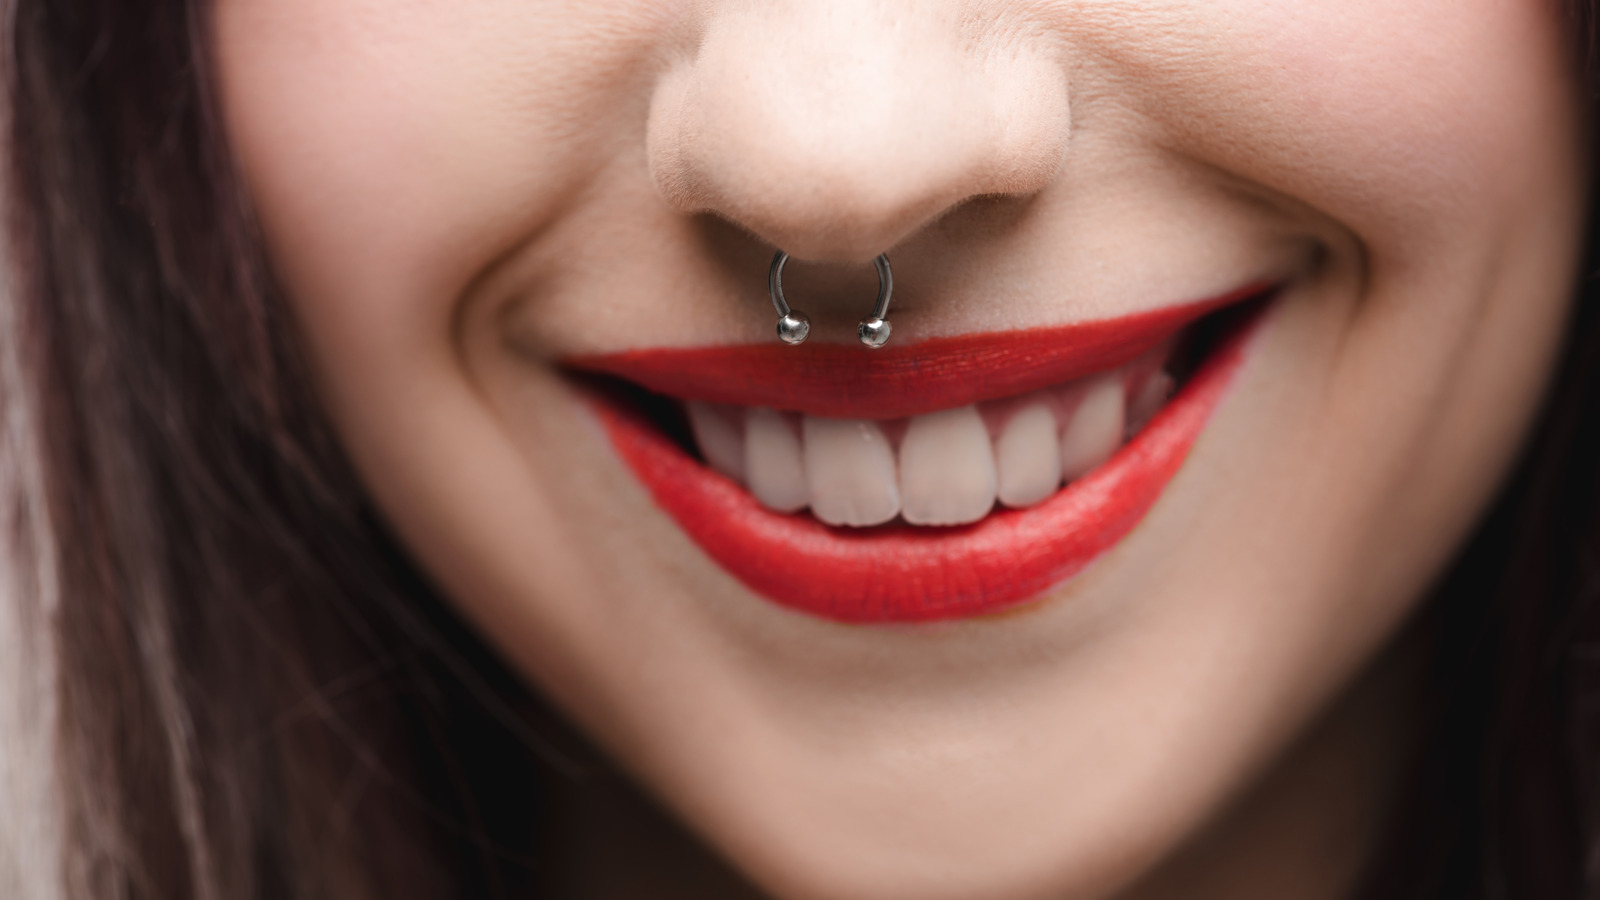 How to Clean a Nose Piercing Correctly, According to a Derm